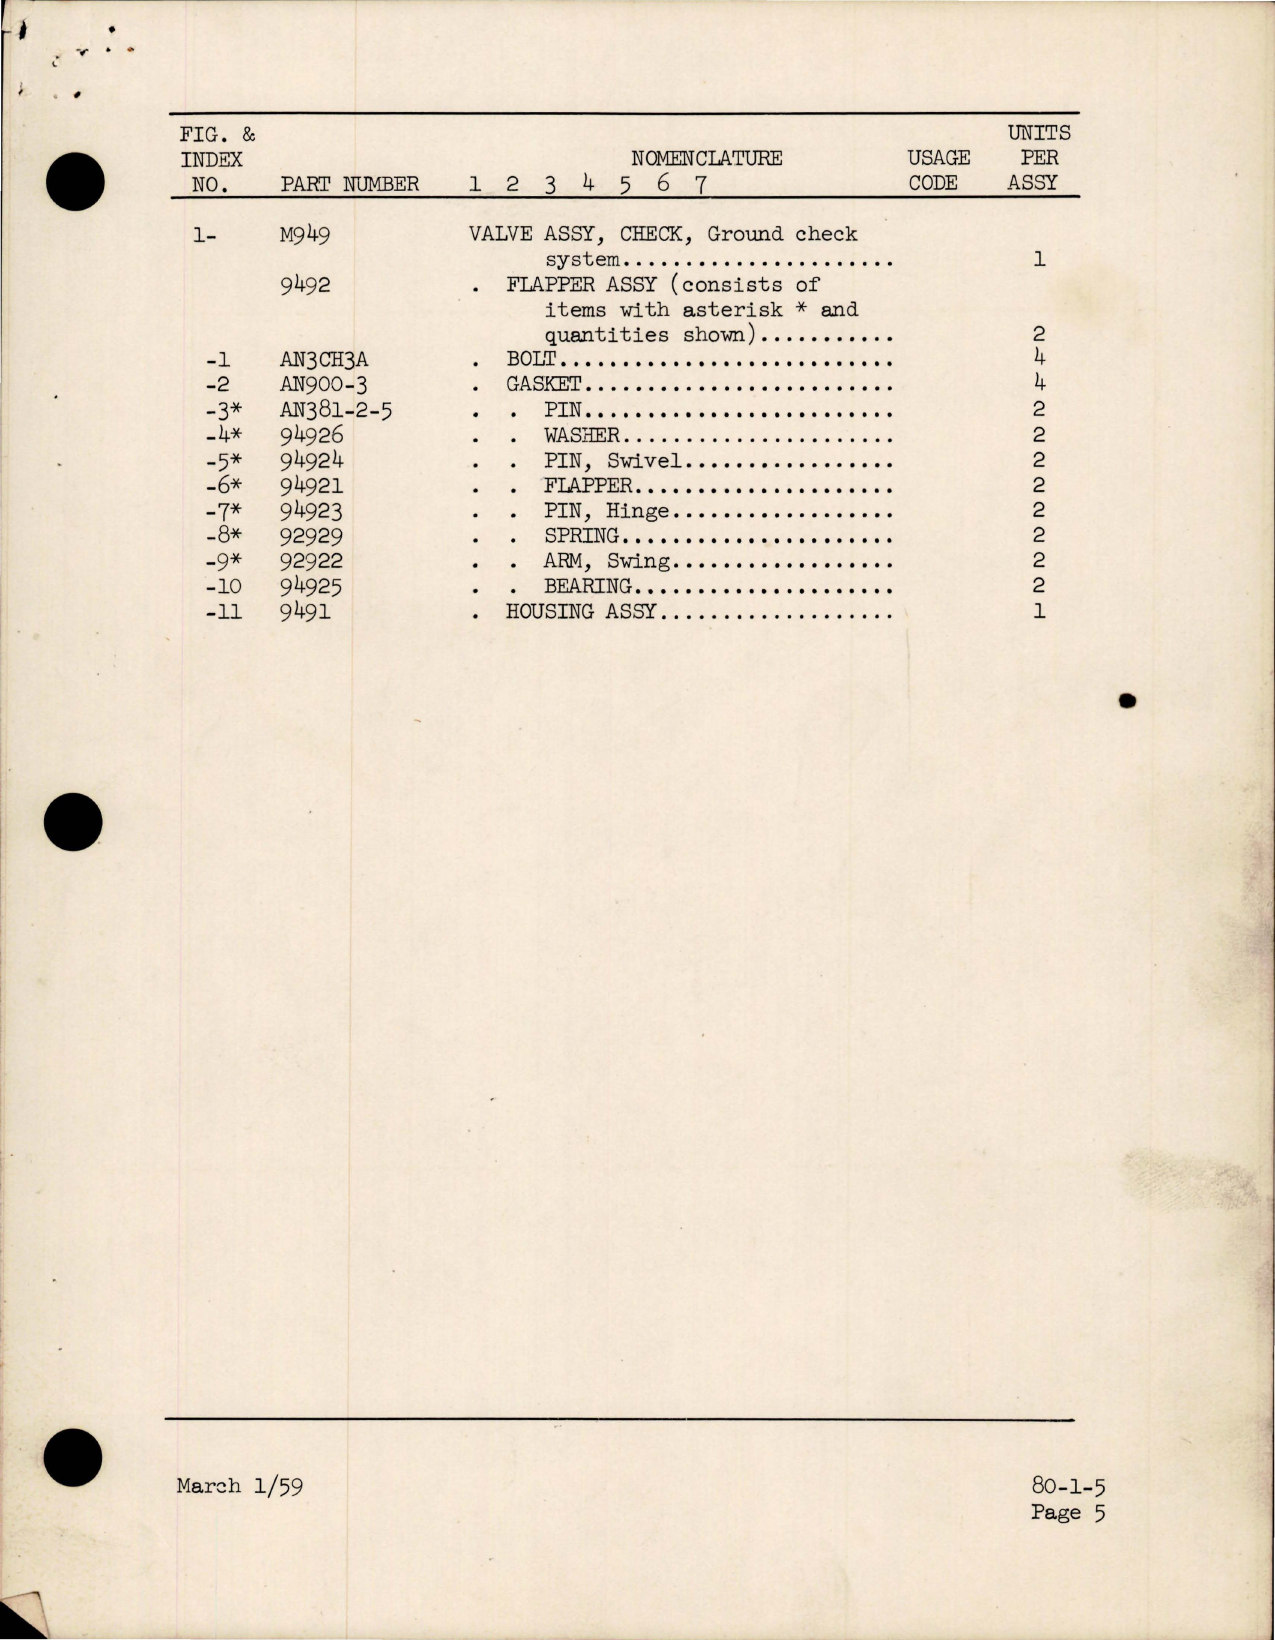 Sample page 5 from AirCorps Library document: Overhaul Instructions for Ground Check System Check Valve - Part M949 